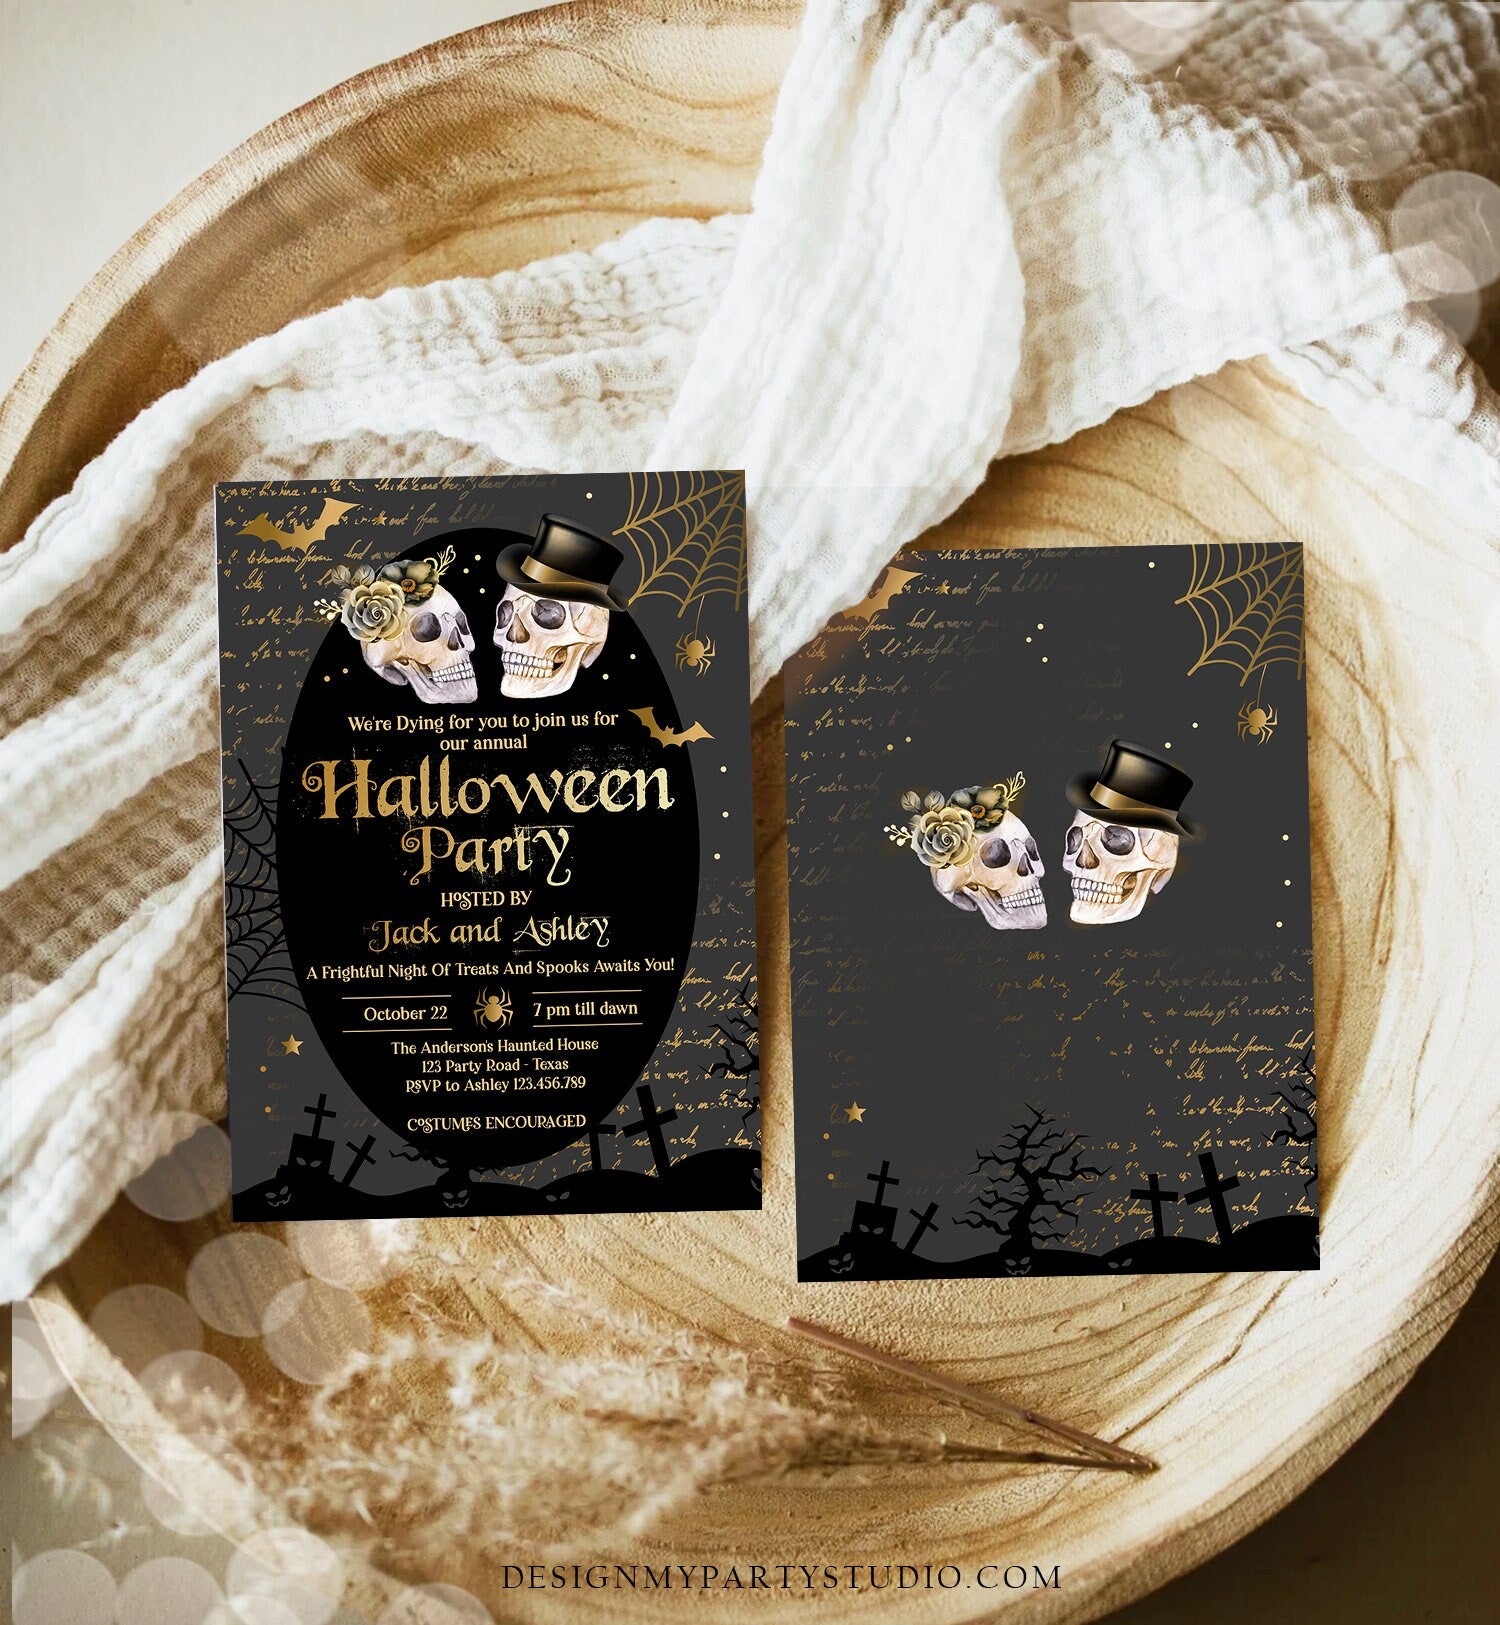 Editable Costumes And Cocktails Halloween Party Invitation Adult Halloween Party Boos or Brews Vintage Gothic Party Download Corjl 0472 0009